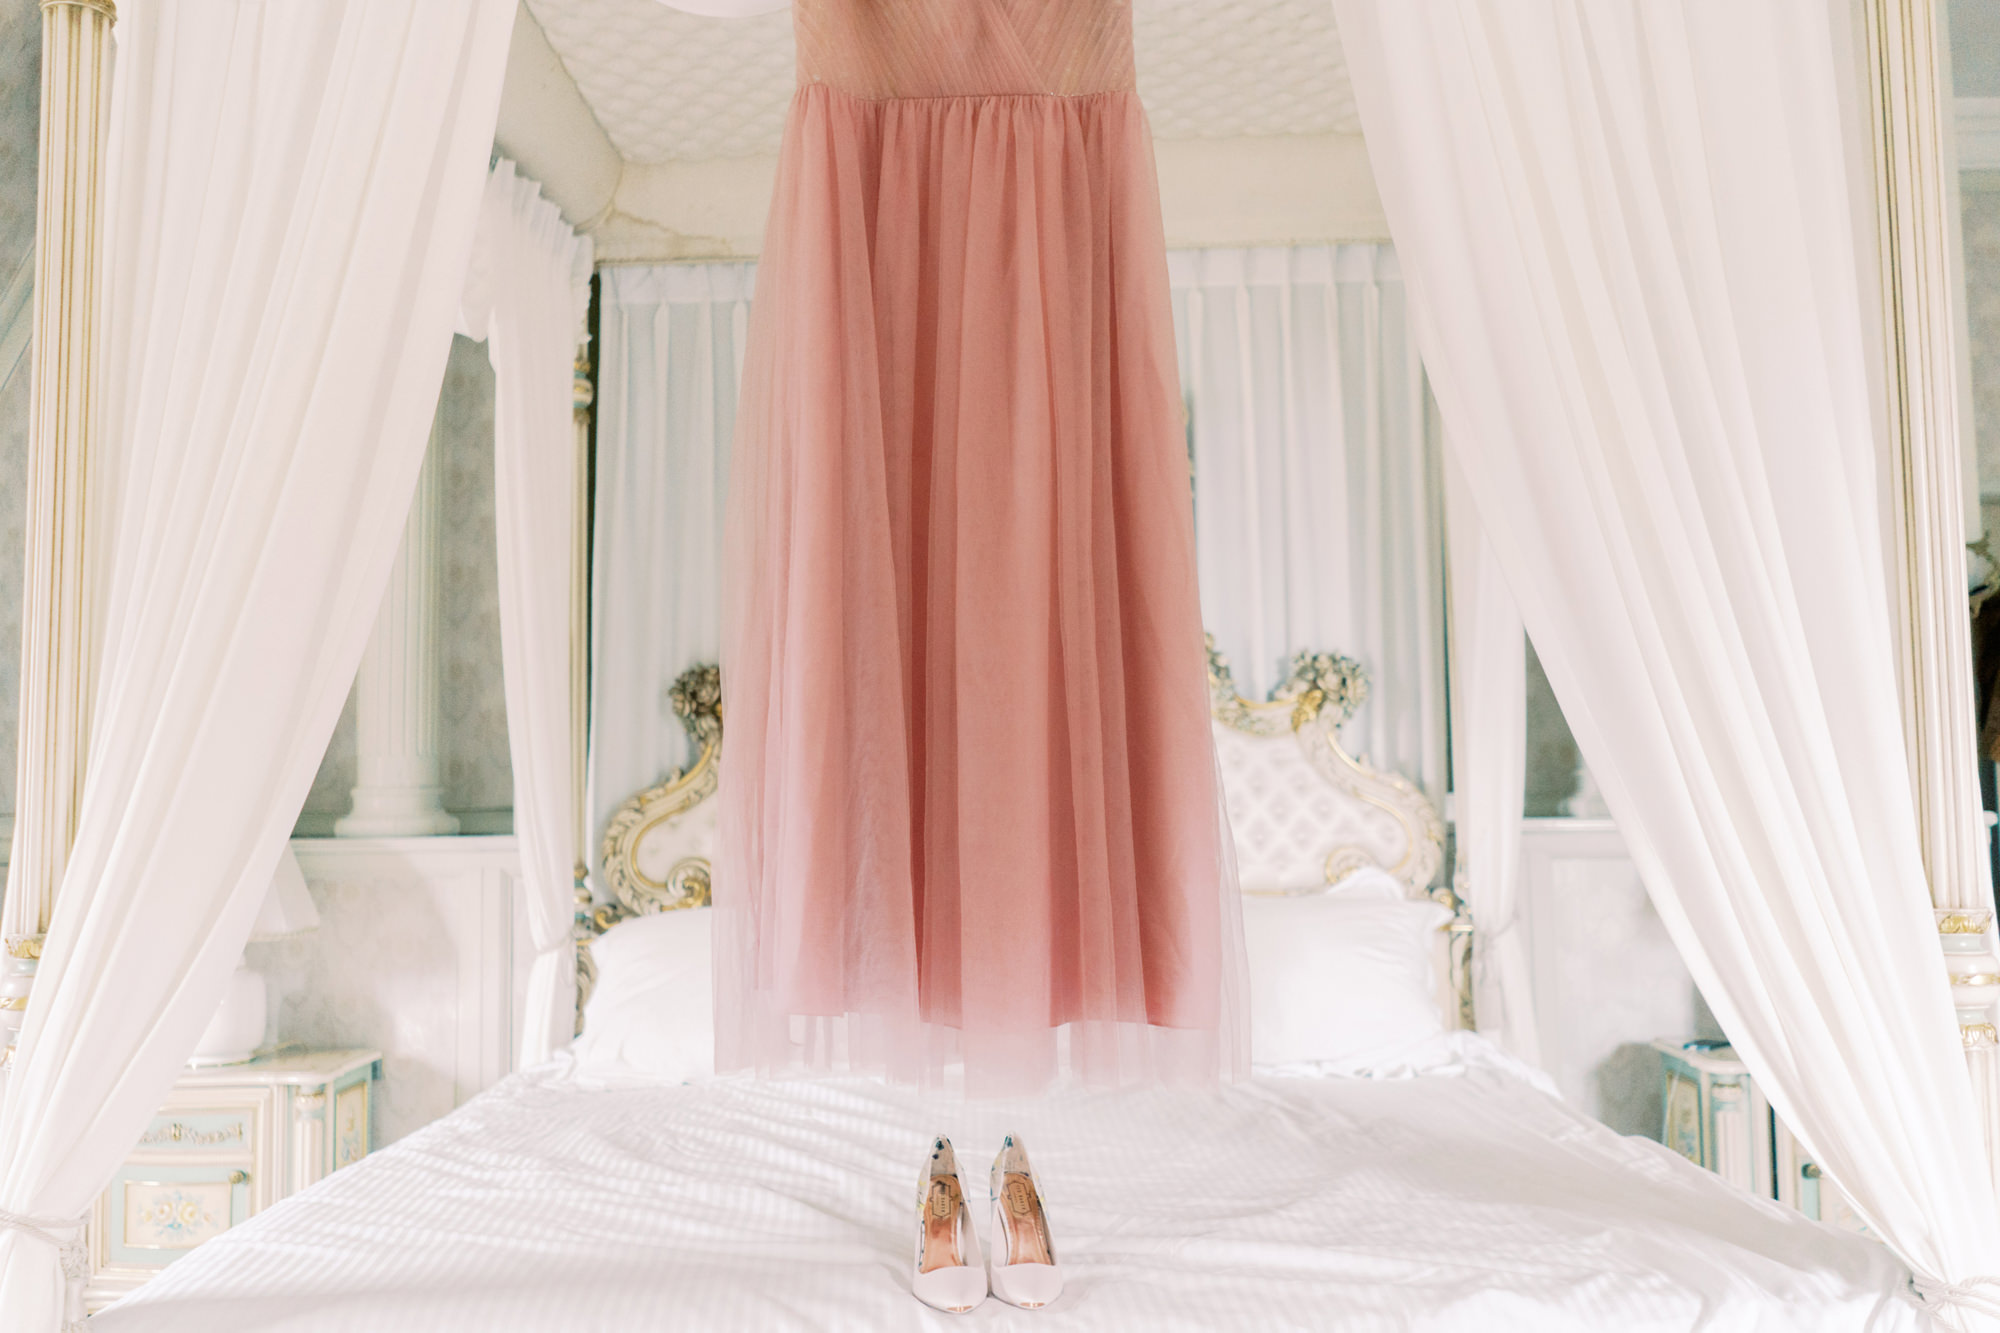 Nadira's gown and shoes. This lovely blush tulle gown is from Etsy!